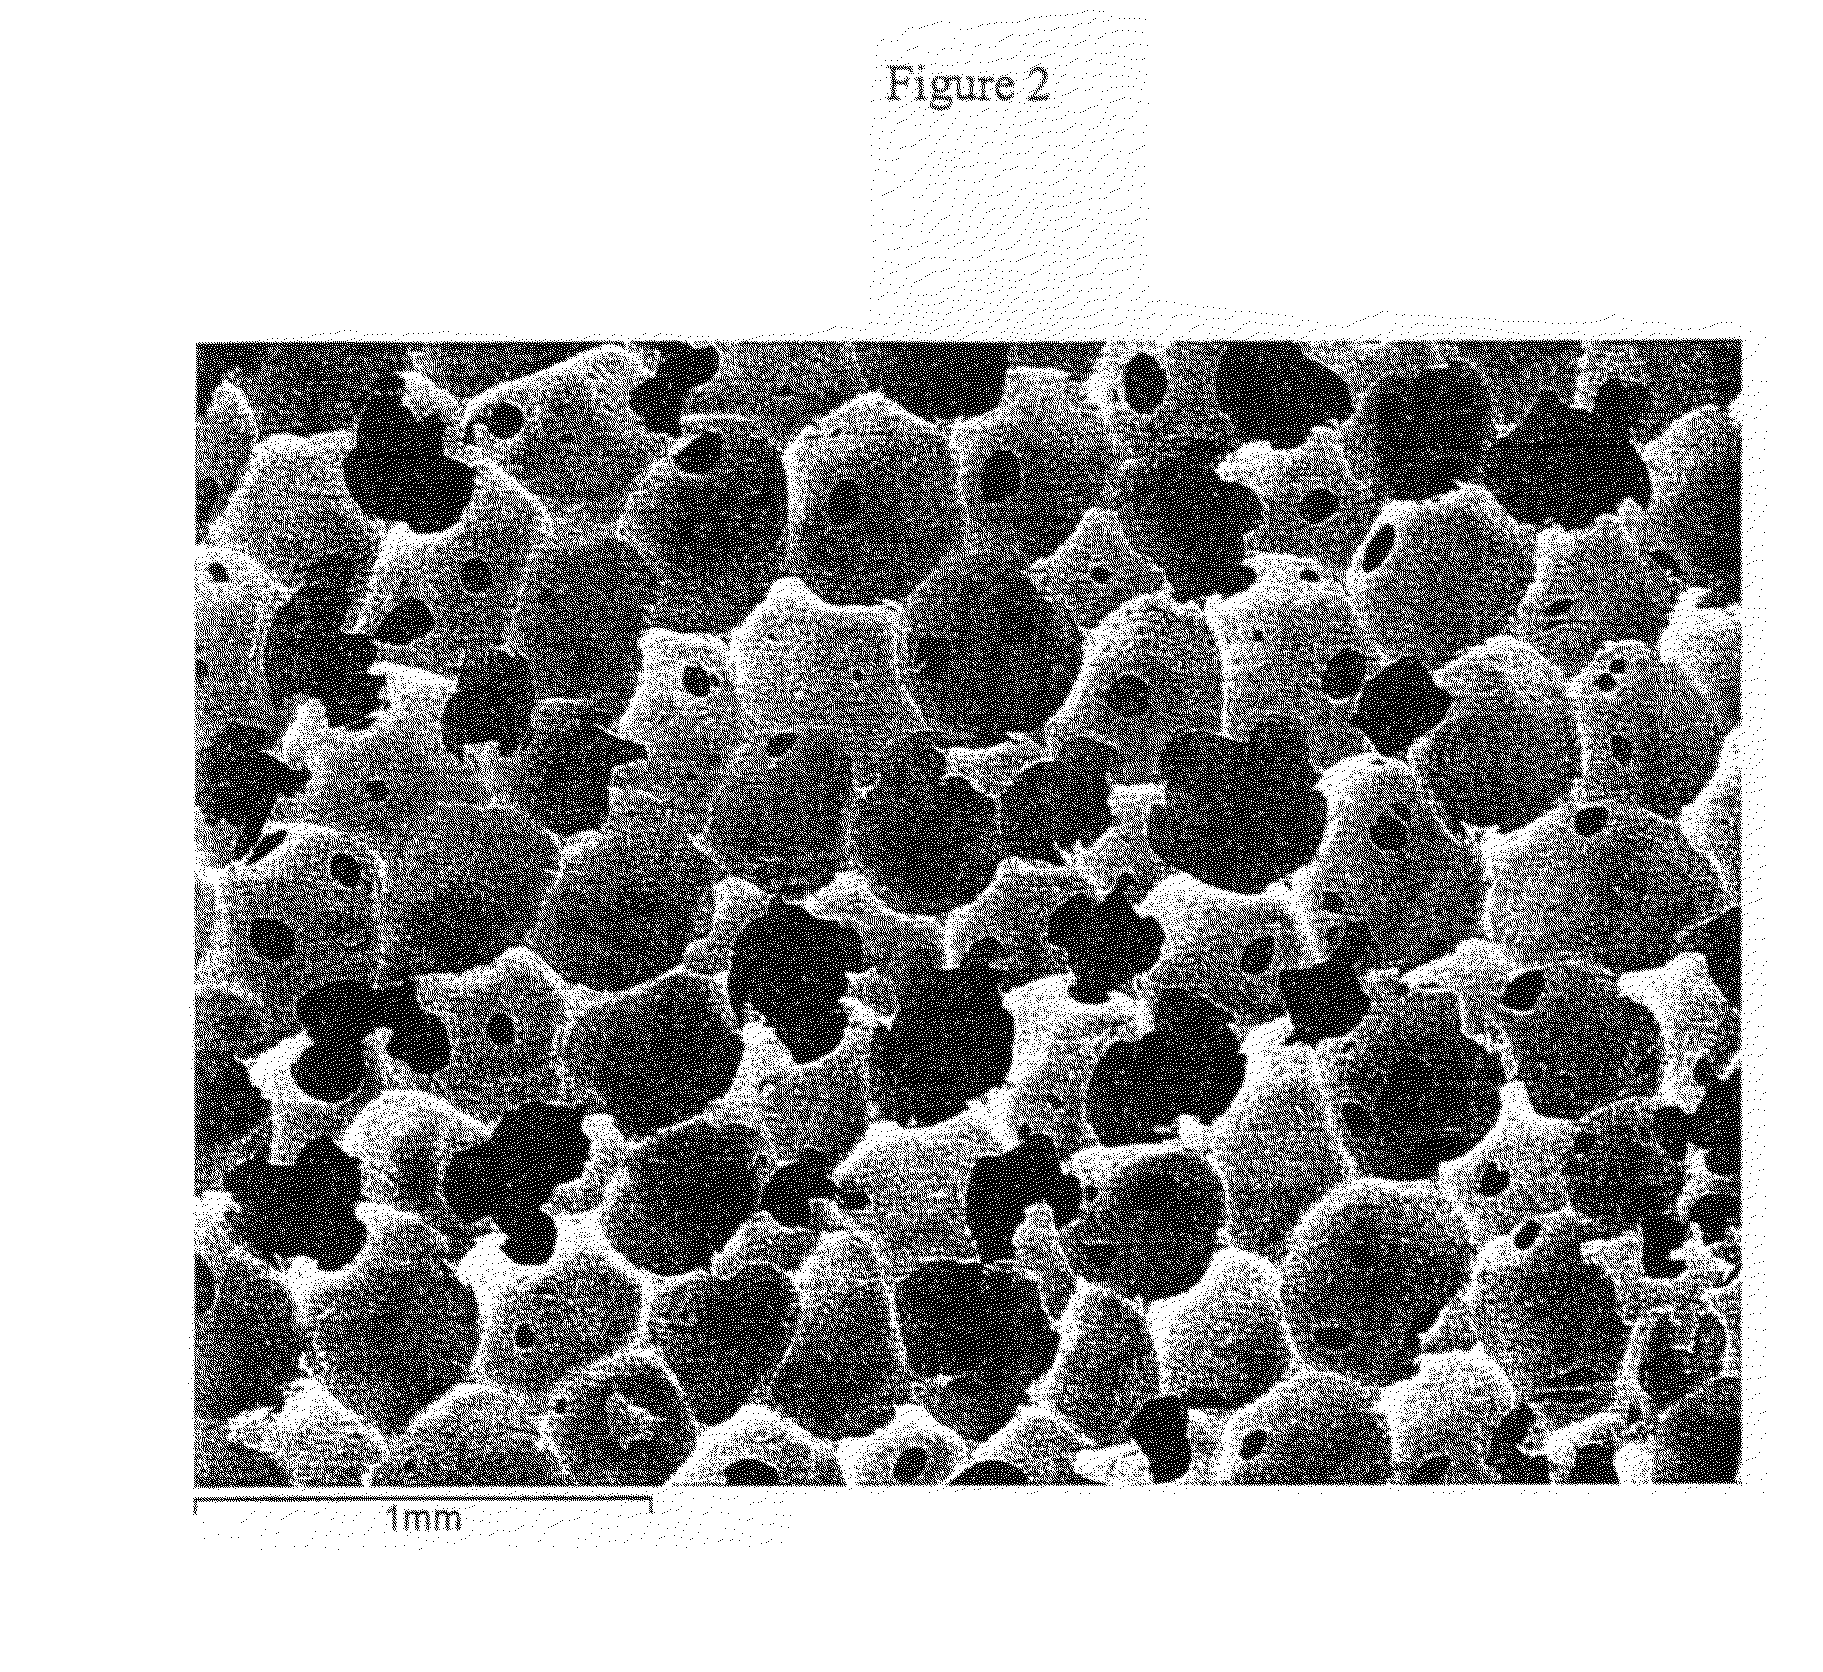 At least partially resorbable reticulated elastomeric matrix elements and methods of making same